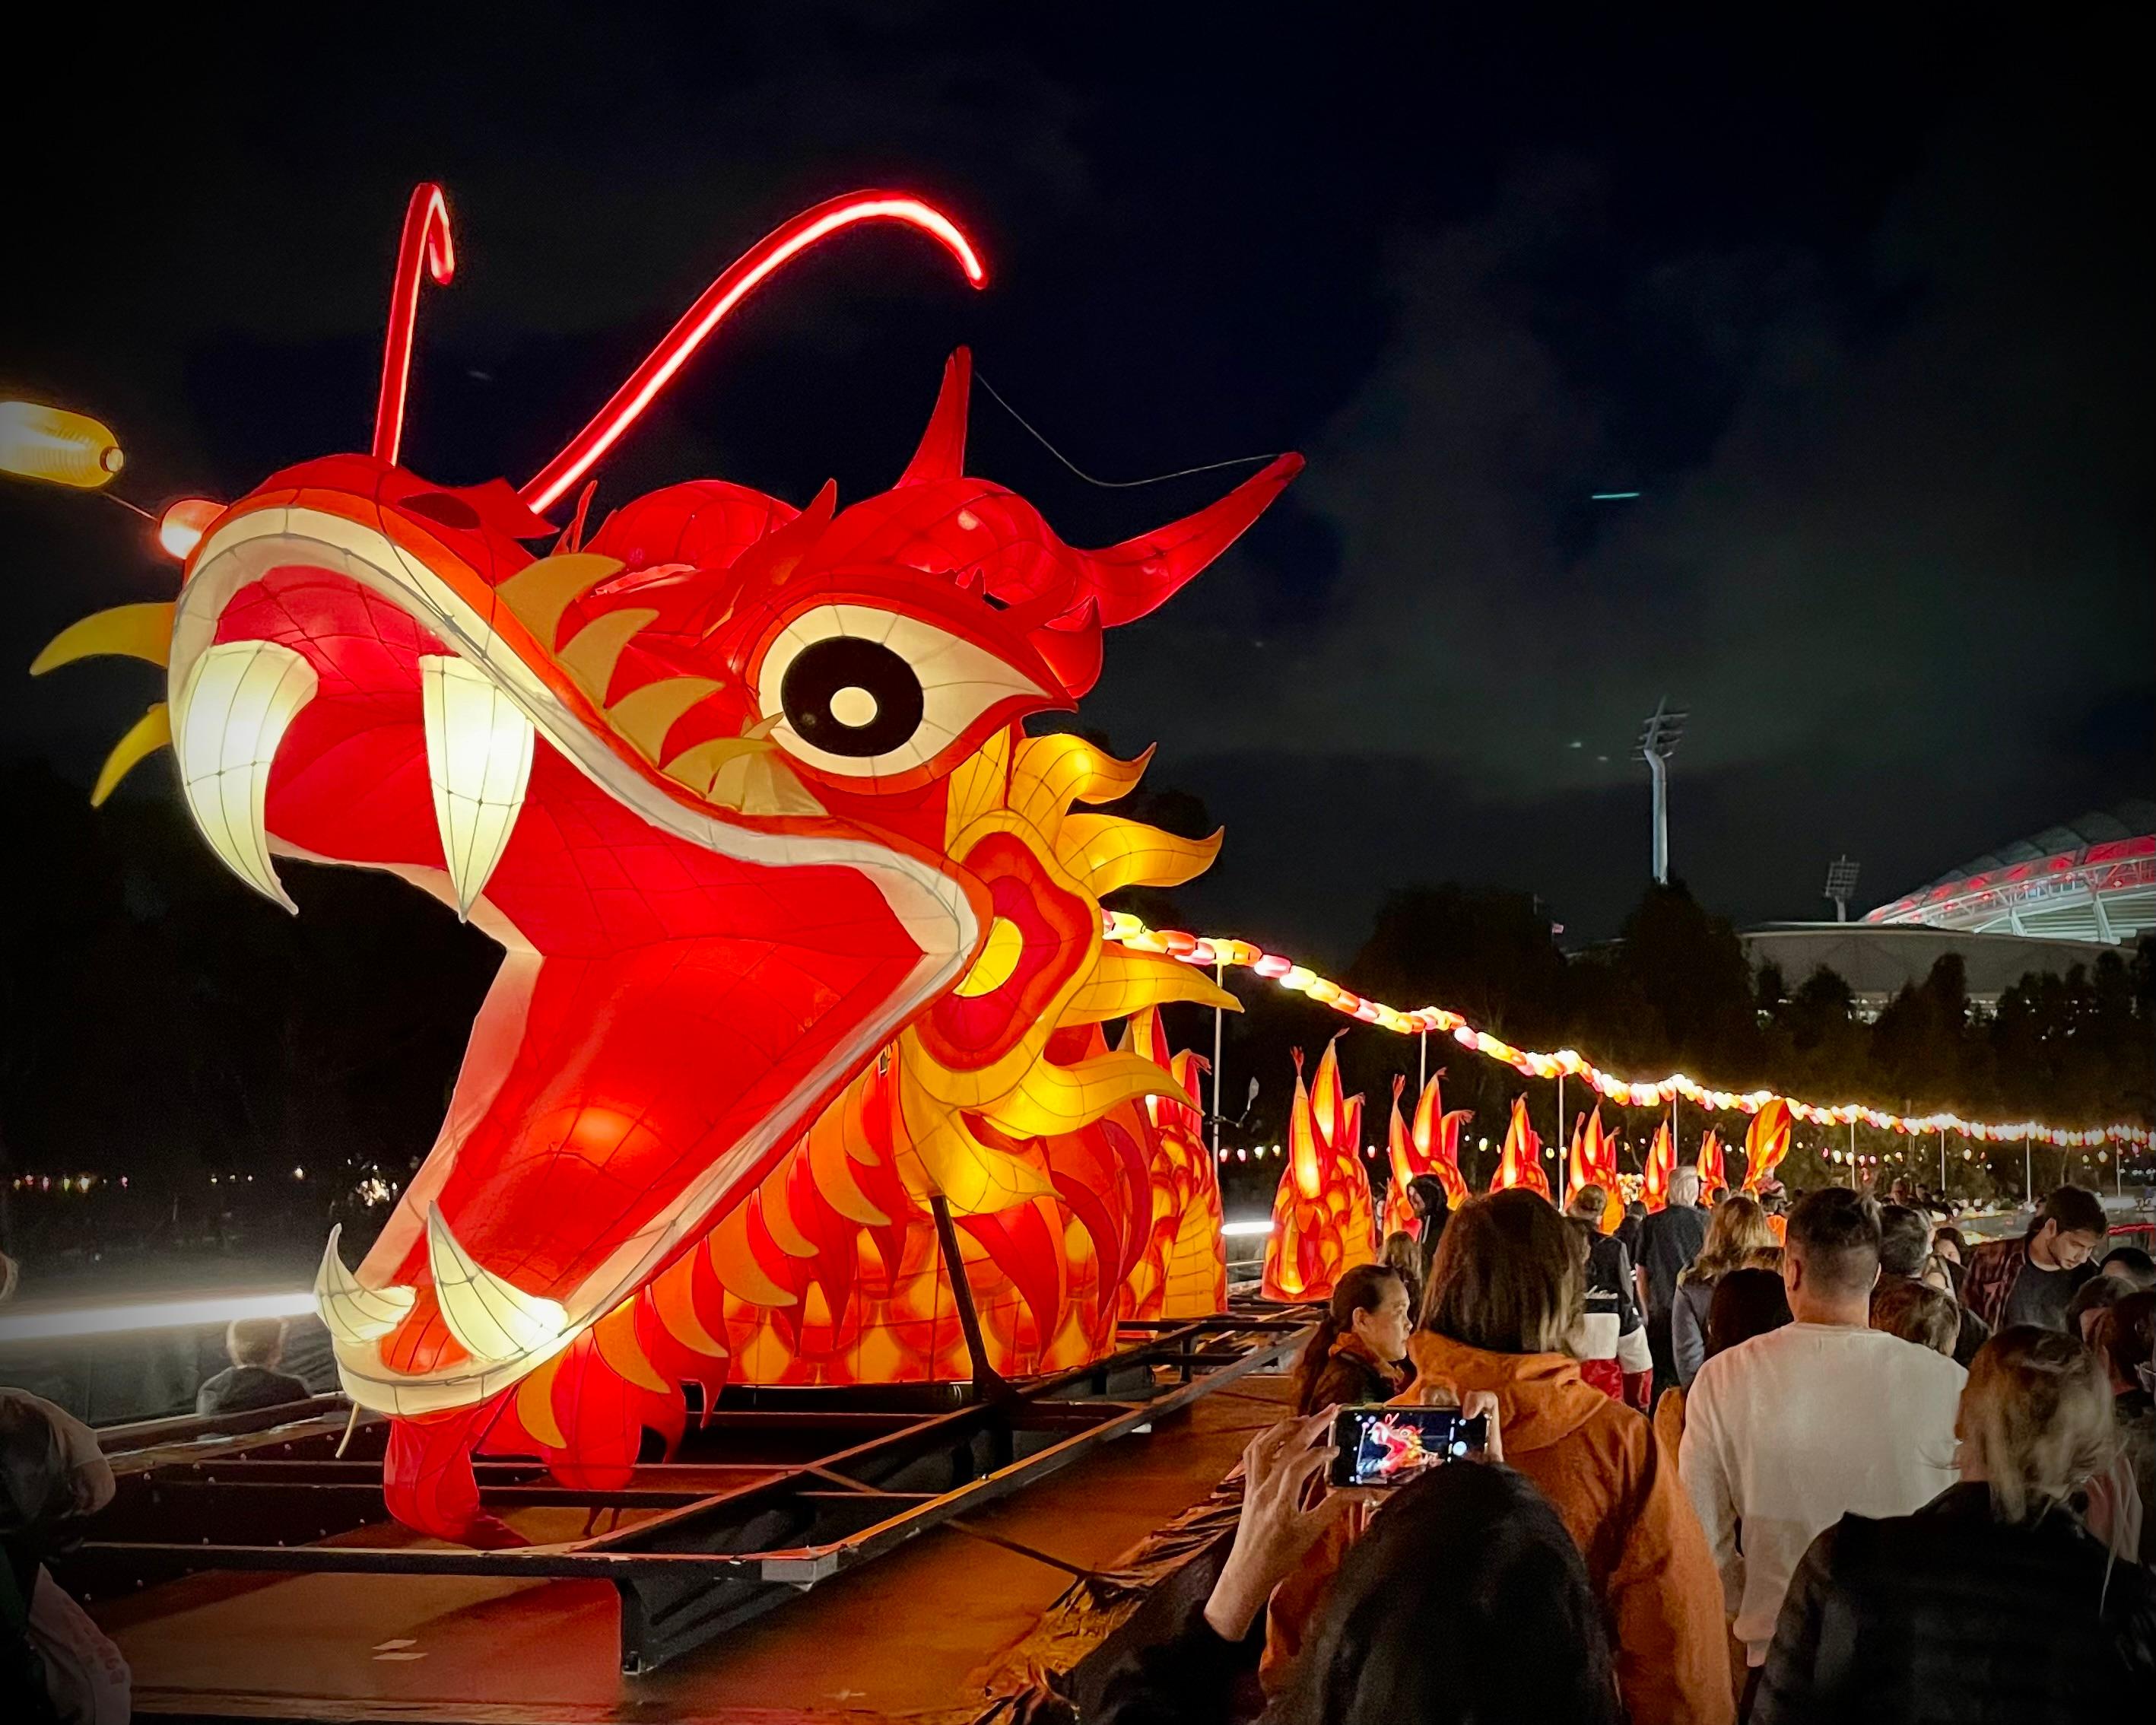 Nestled across the riverbank in Adelaide, Australia, a fabulous 40-metre-long Hong Kong Dragon lantern lit up the Moon Lantern Trail of the OzAsia Festival from October 19 to 22, showcasing the vibrancy of Hong Kong as an East-meets-West centre for international cultural exchange to audiences in Australia.

